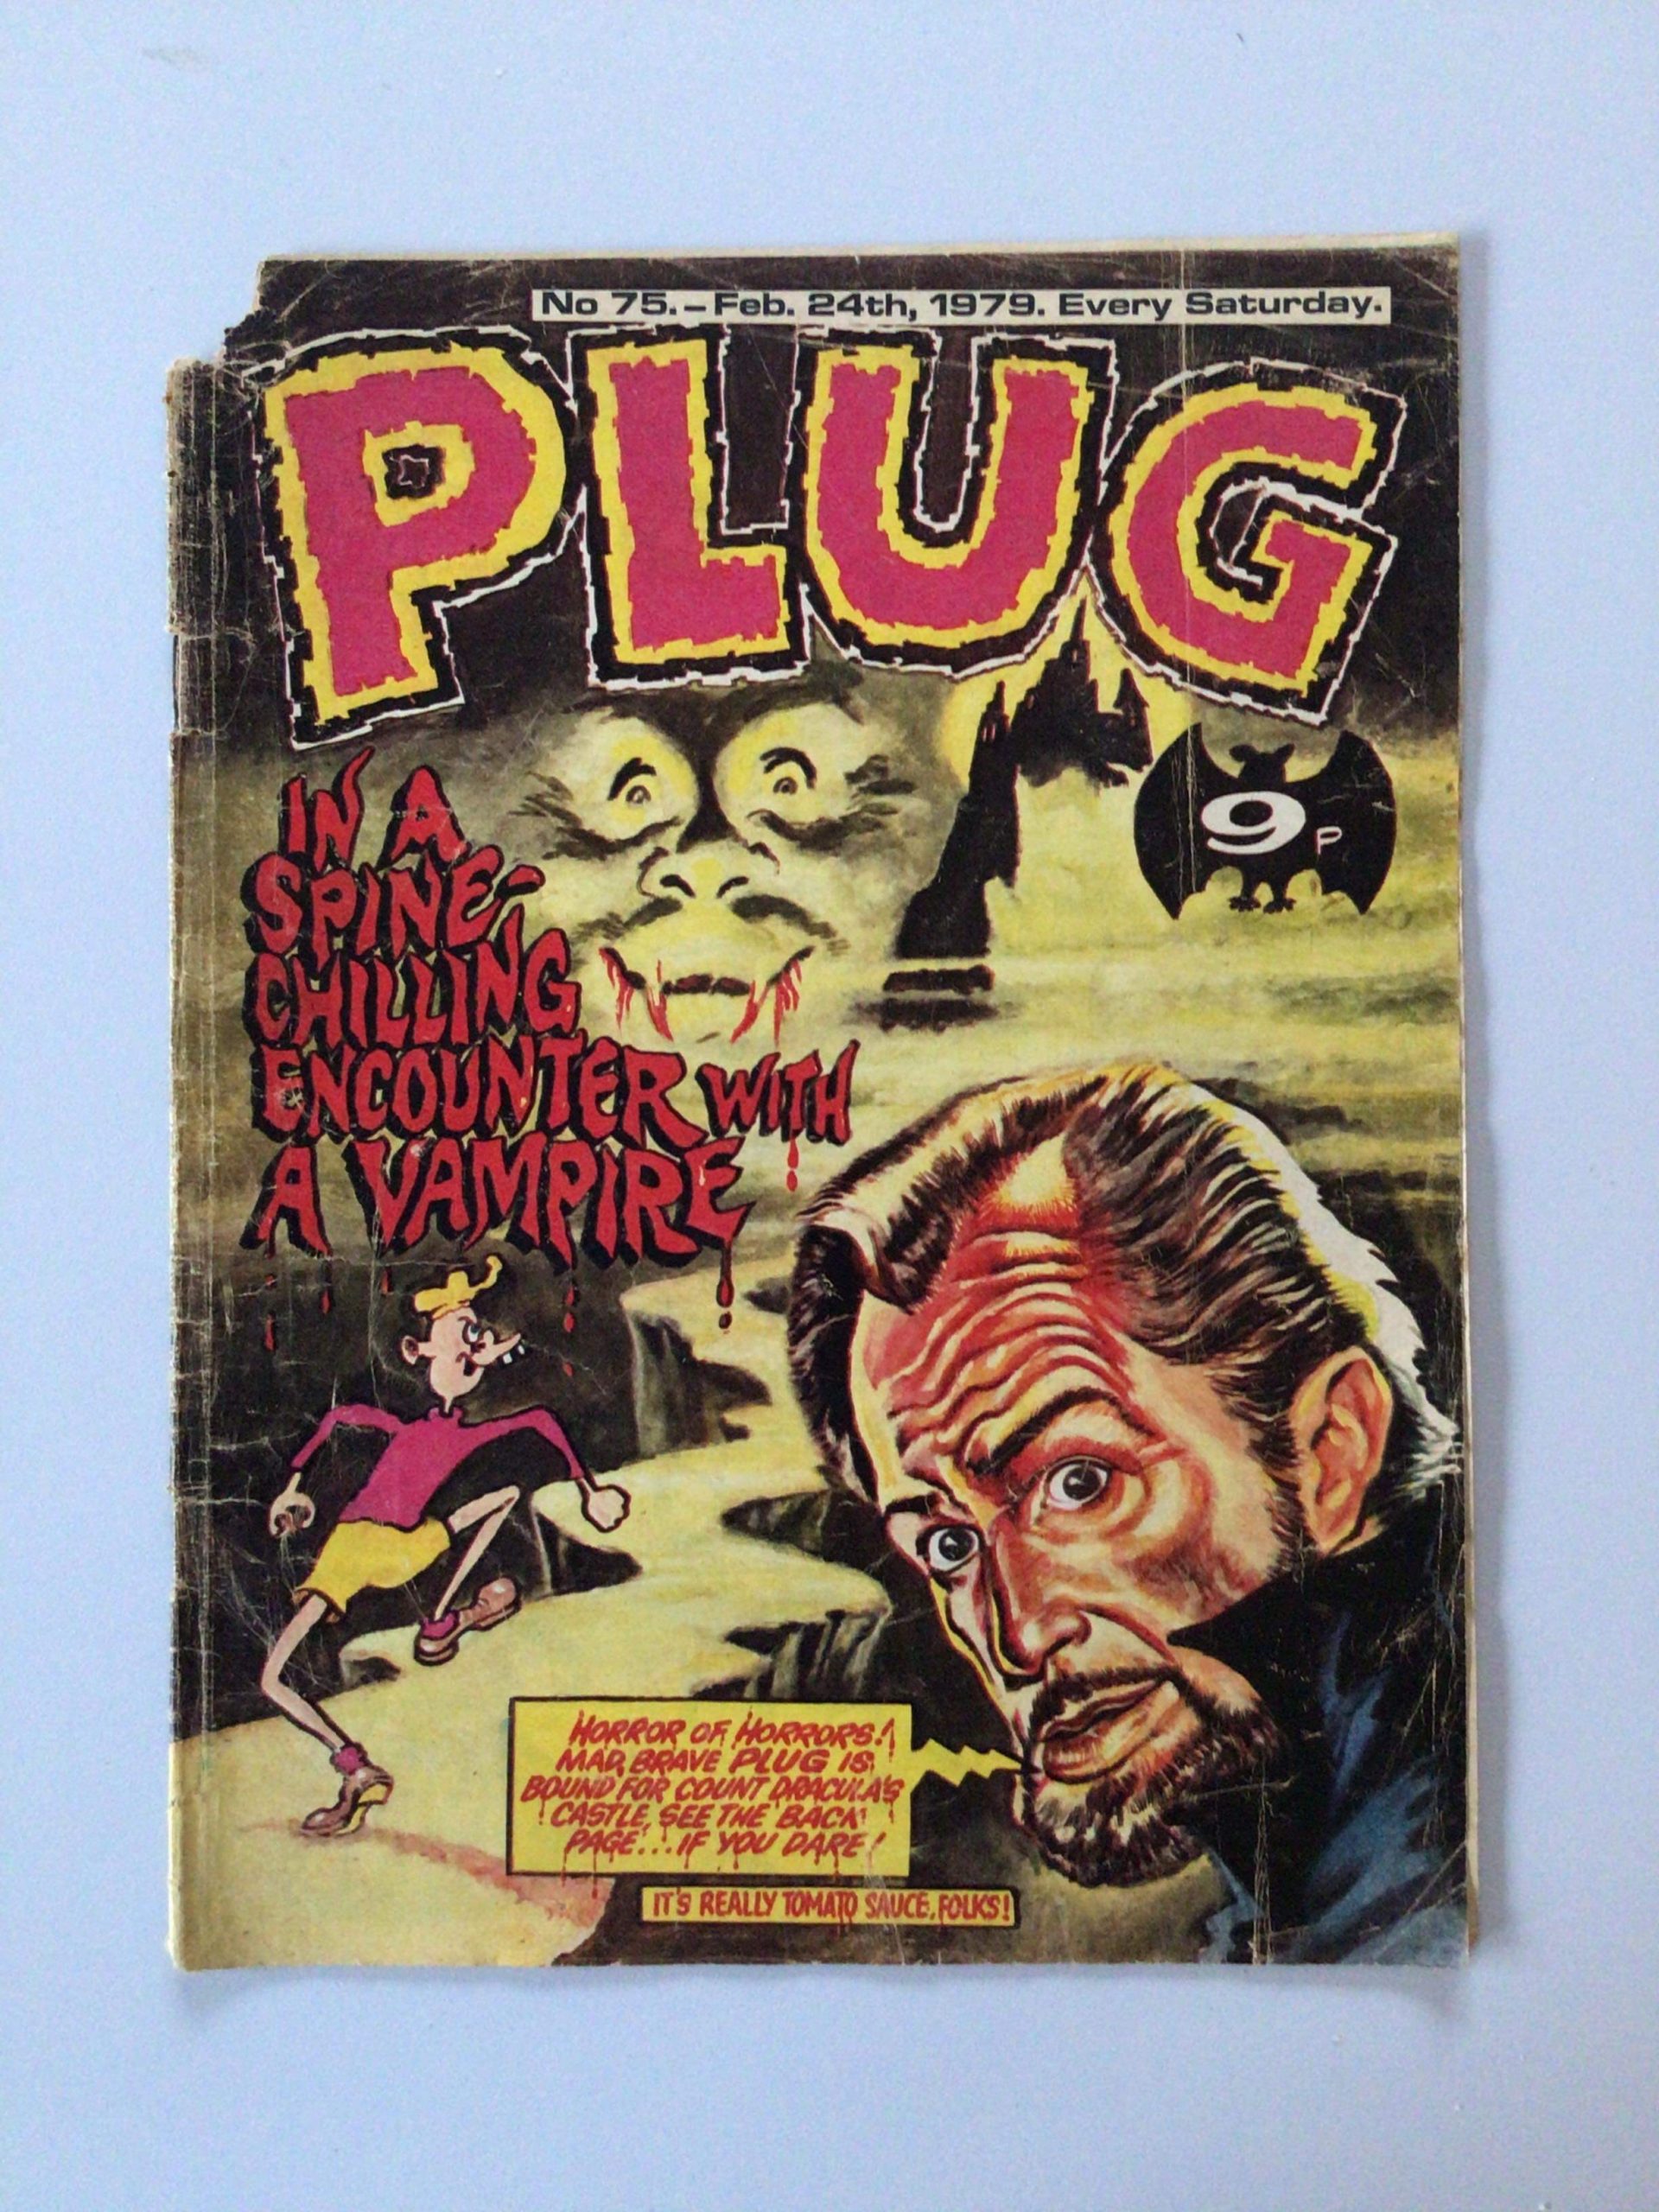 Plug Comic No. 75 cover dated 24th February 1979. The final issue of this comic before it merged with Beezer